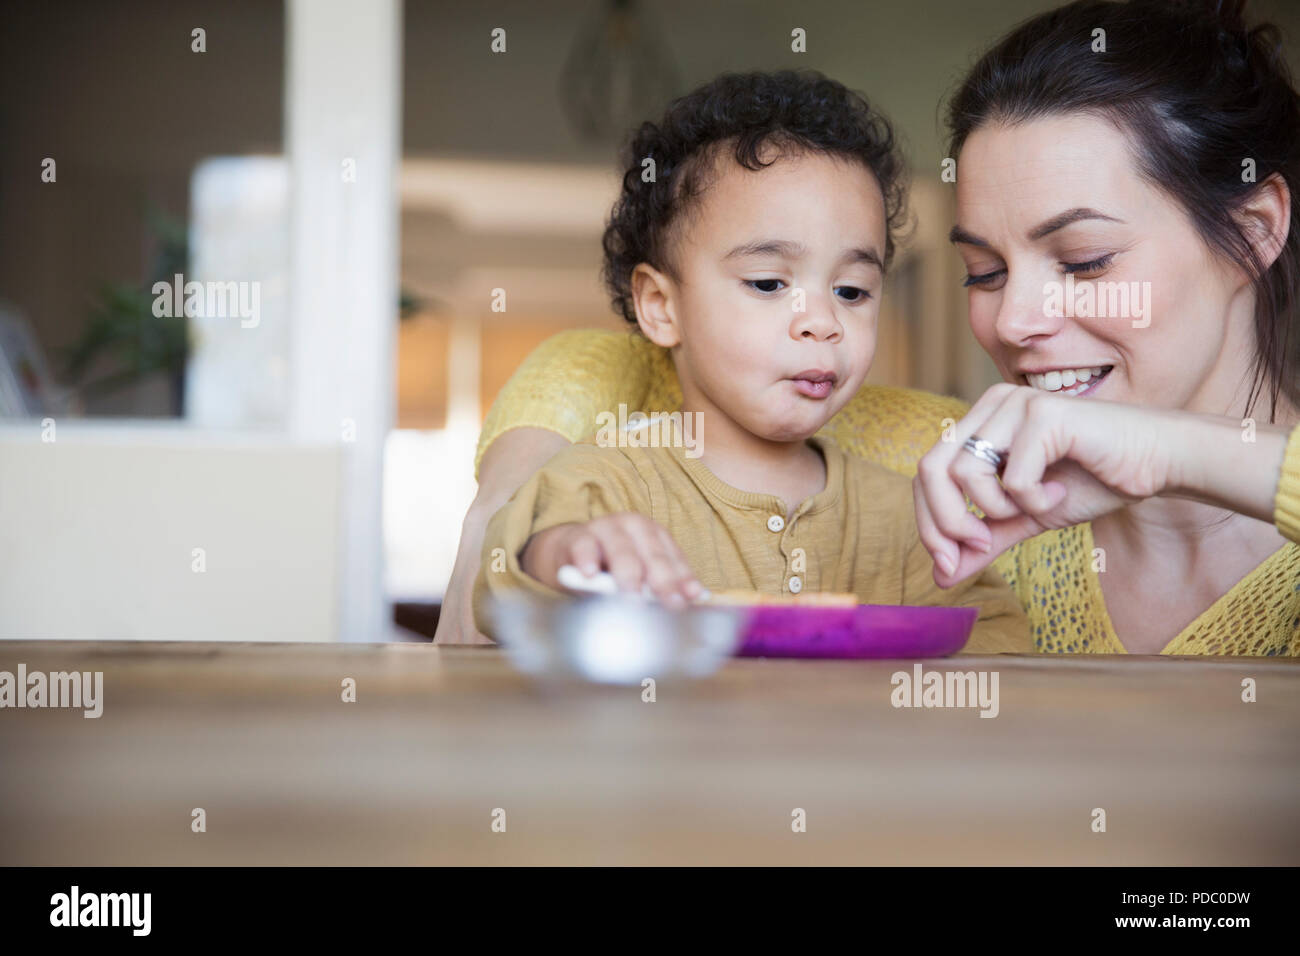 Mother feeding baby son at table Stock Photo